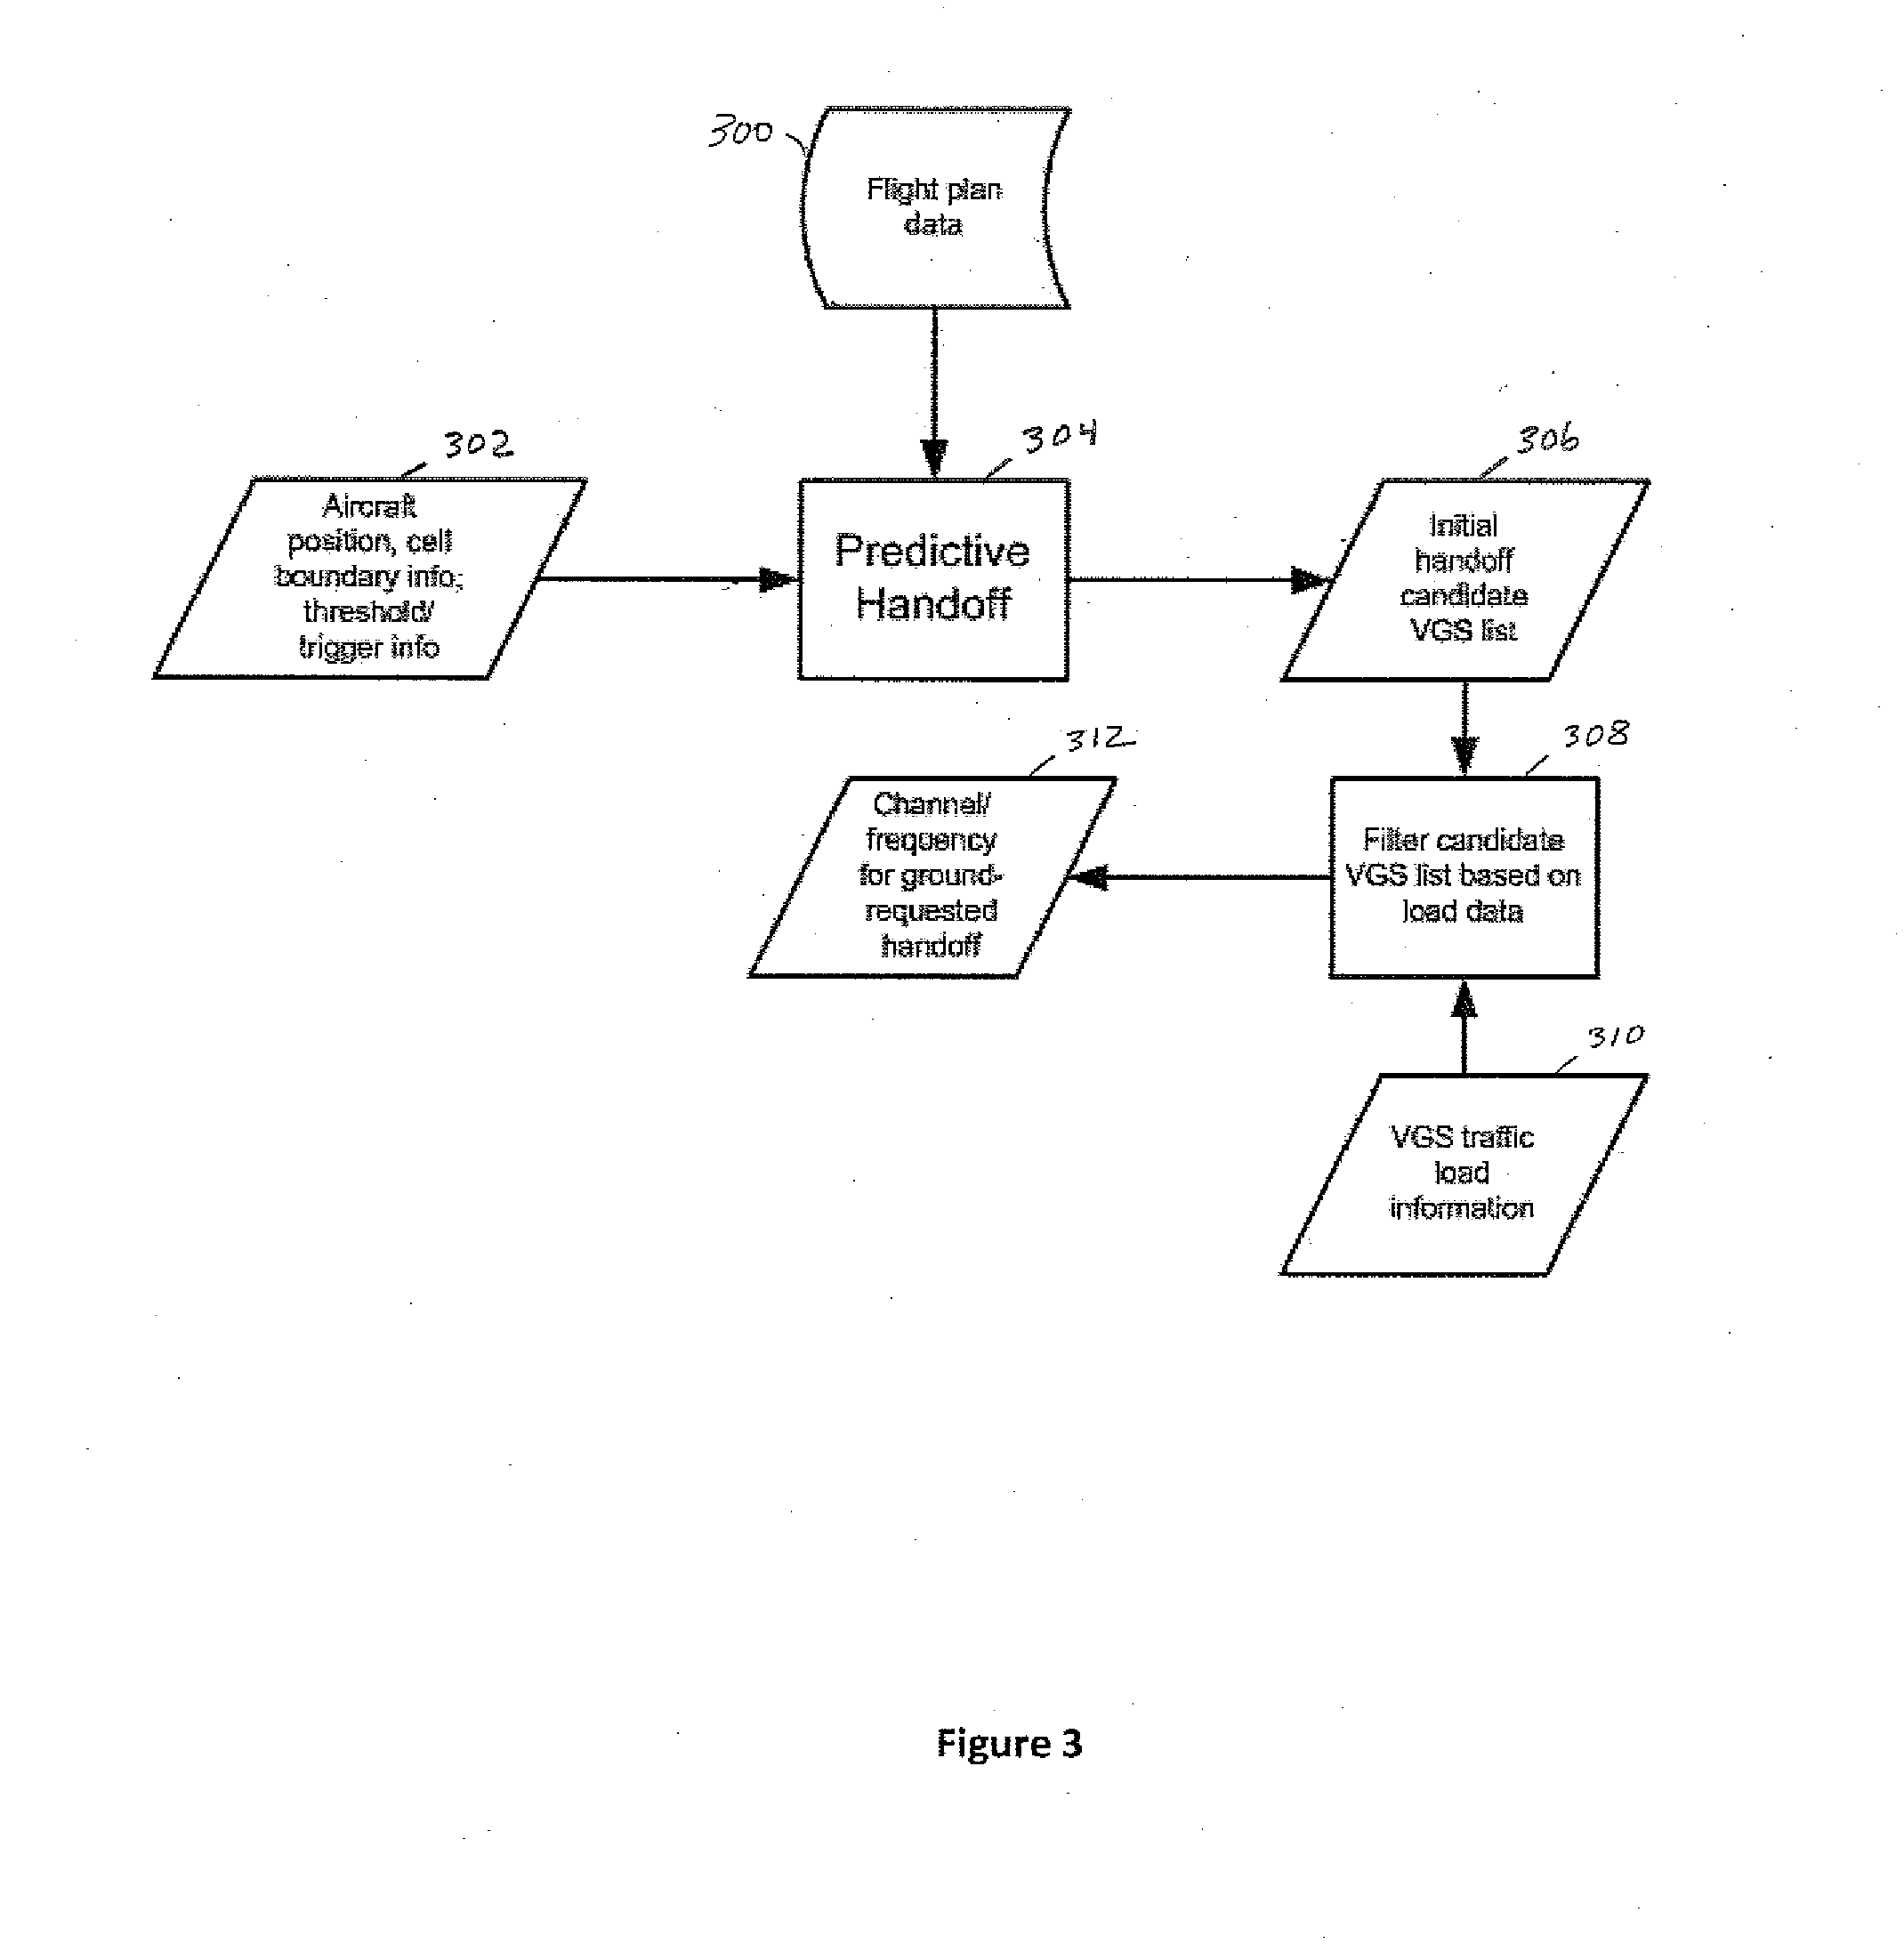 System and Method for Load Balancing and Handoff Management Based on Flight Plan and Channel Occupancy